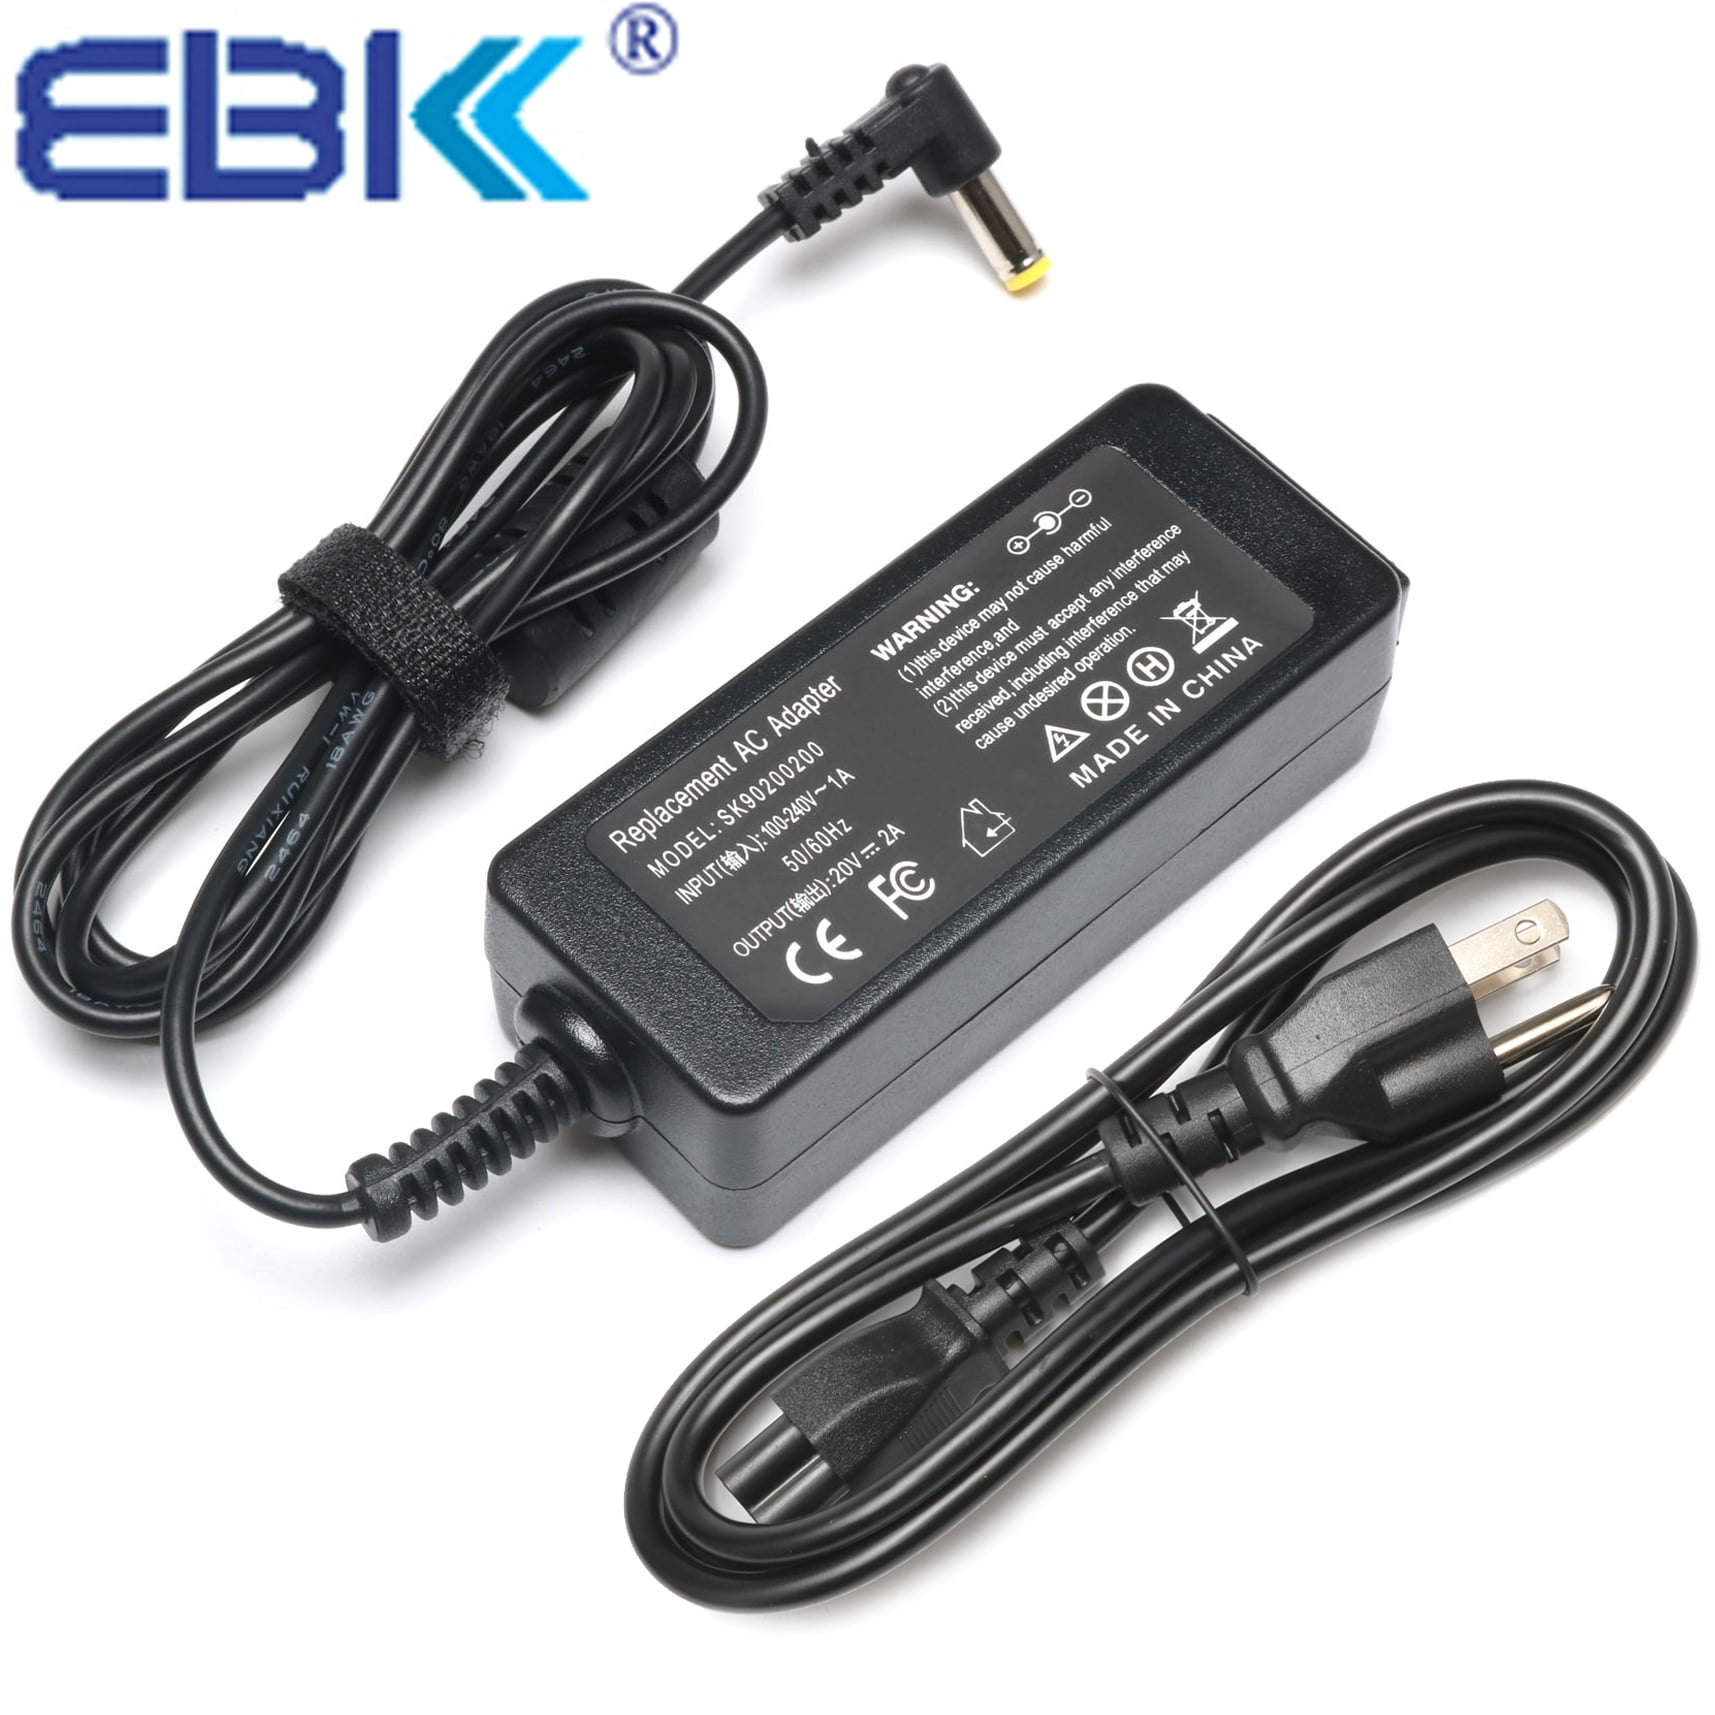 20V AC Charger Adapter/ Power Supply for Soundlink I II 1 2 3;Boses Companion 20 Multimedia Speaker System; SoundTouch Portable Series II Wireless Music System Walmart.com